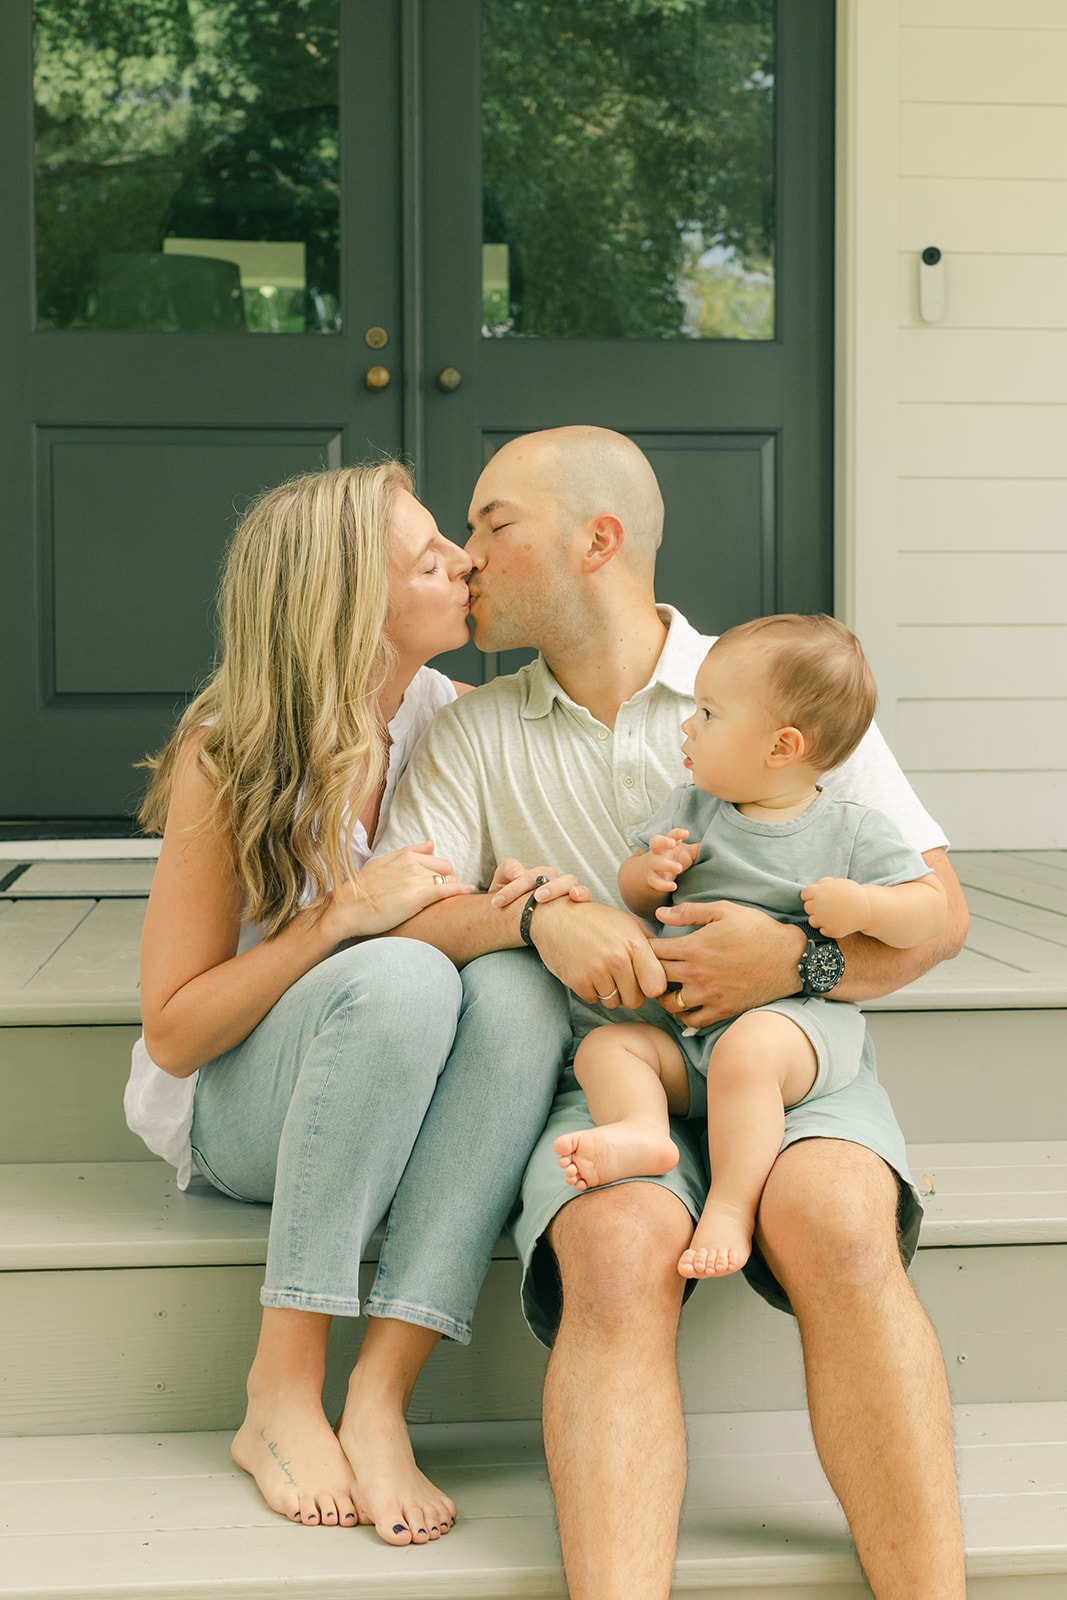 1 year milestone session for baby boy. Cozy at home session. family sitting in front porch